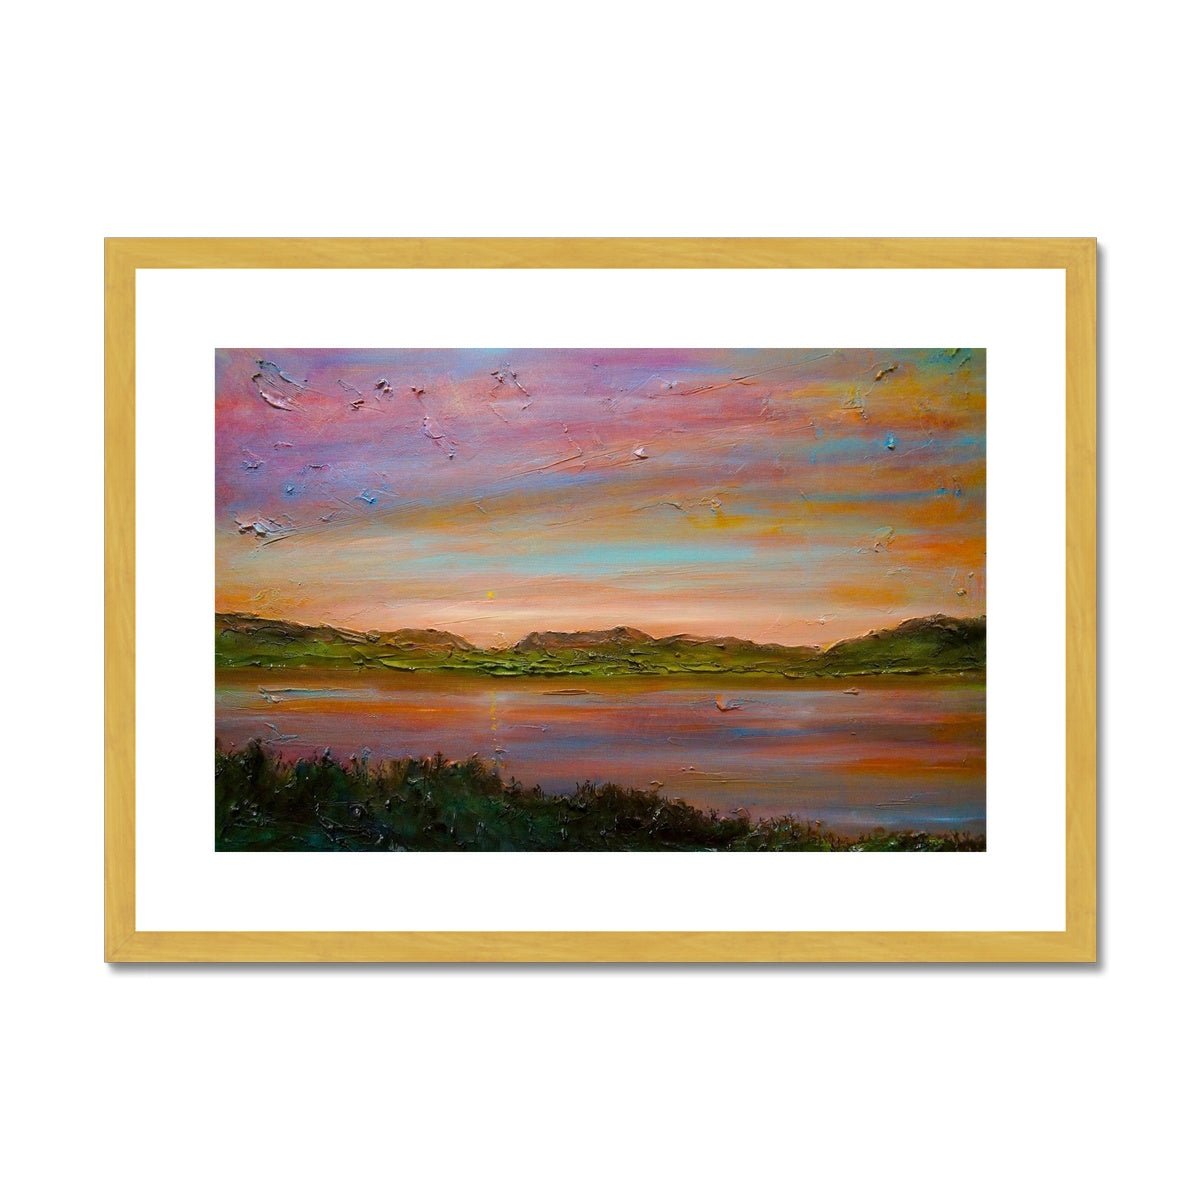 Gourock Golf Club Sunset Painting | Antique Framed & Mounted Prints From Scotland-Antique Framed & Mounted Prints-River Clyde Art Gallery-A2 Landscape-Gold Frame-Paintings, Prints, Homeware, Art Gifts From Scotland By Scottish Artist Kevin Hunter